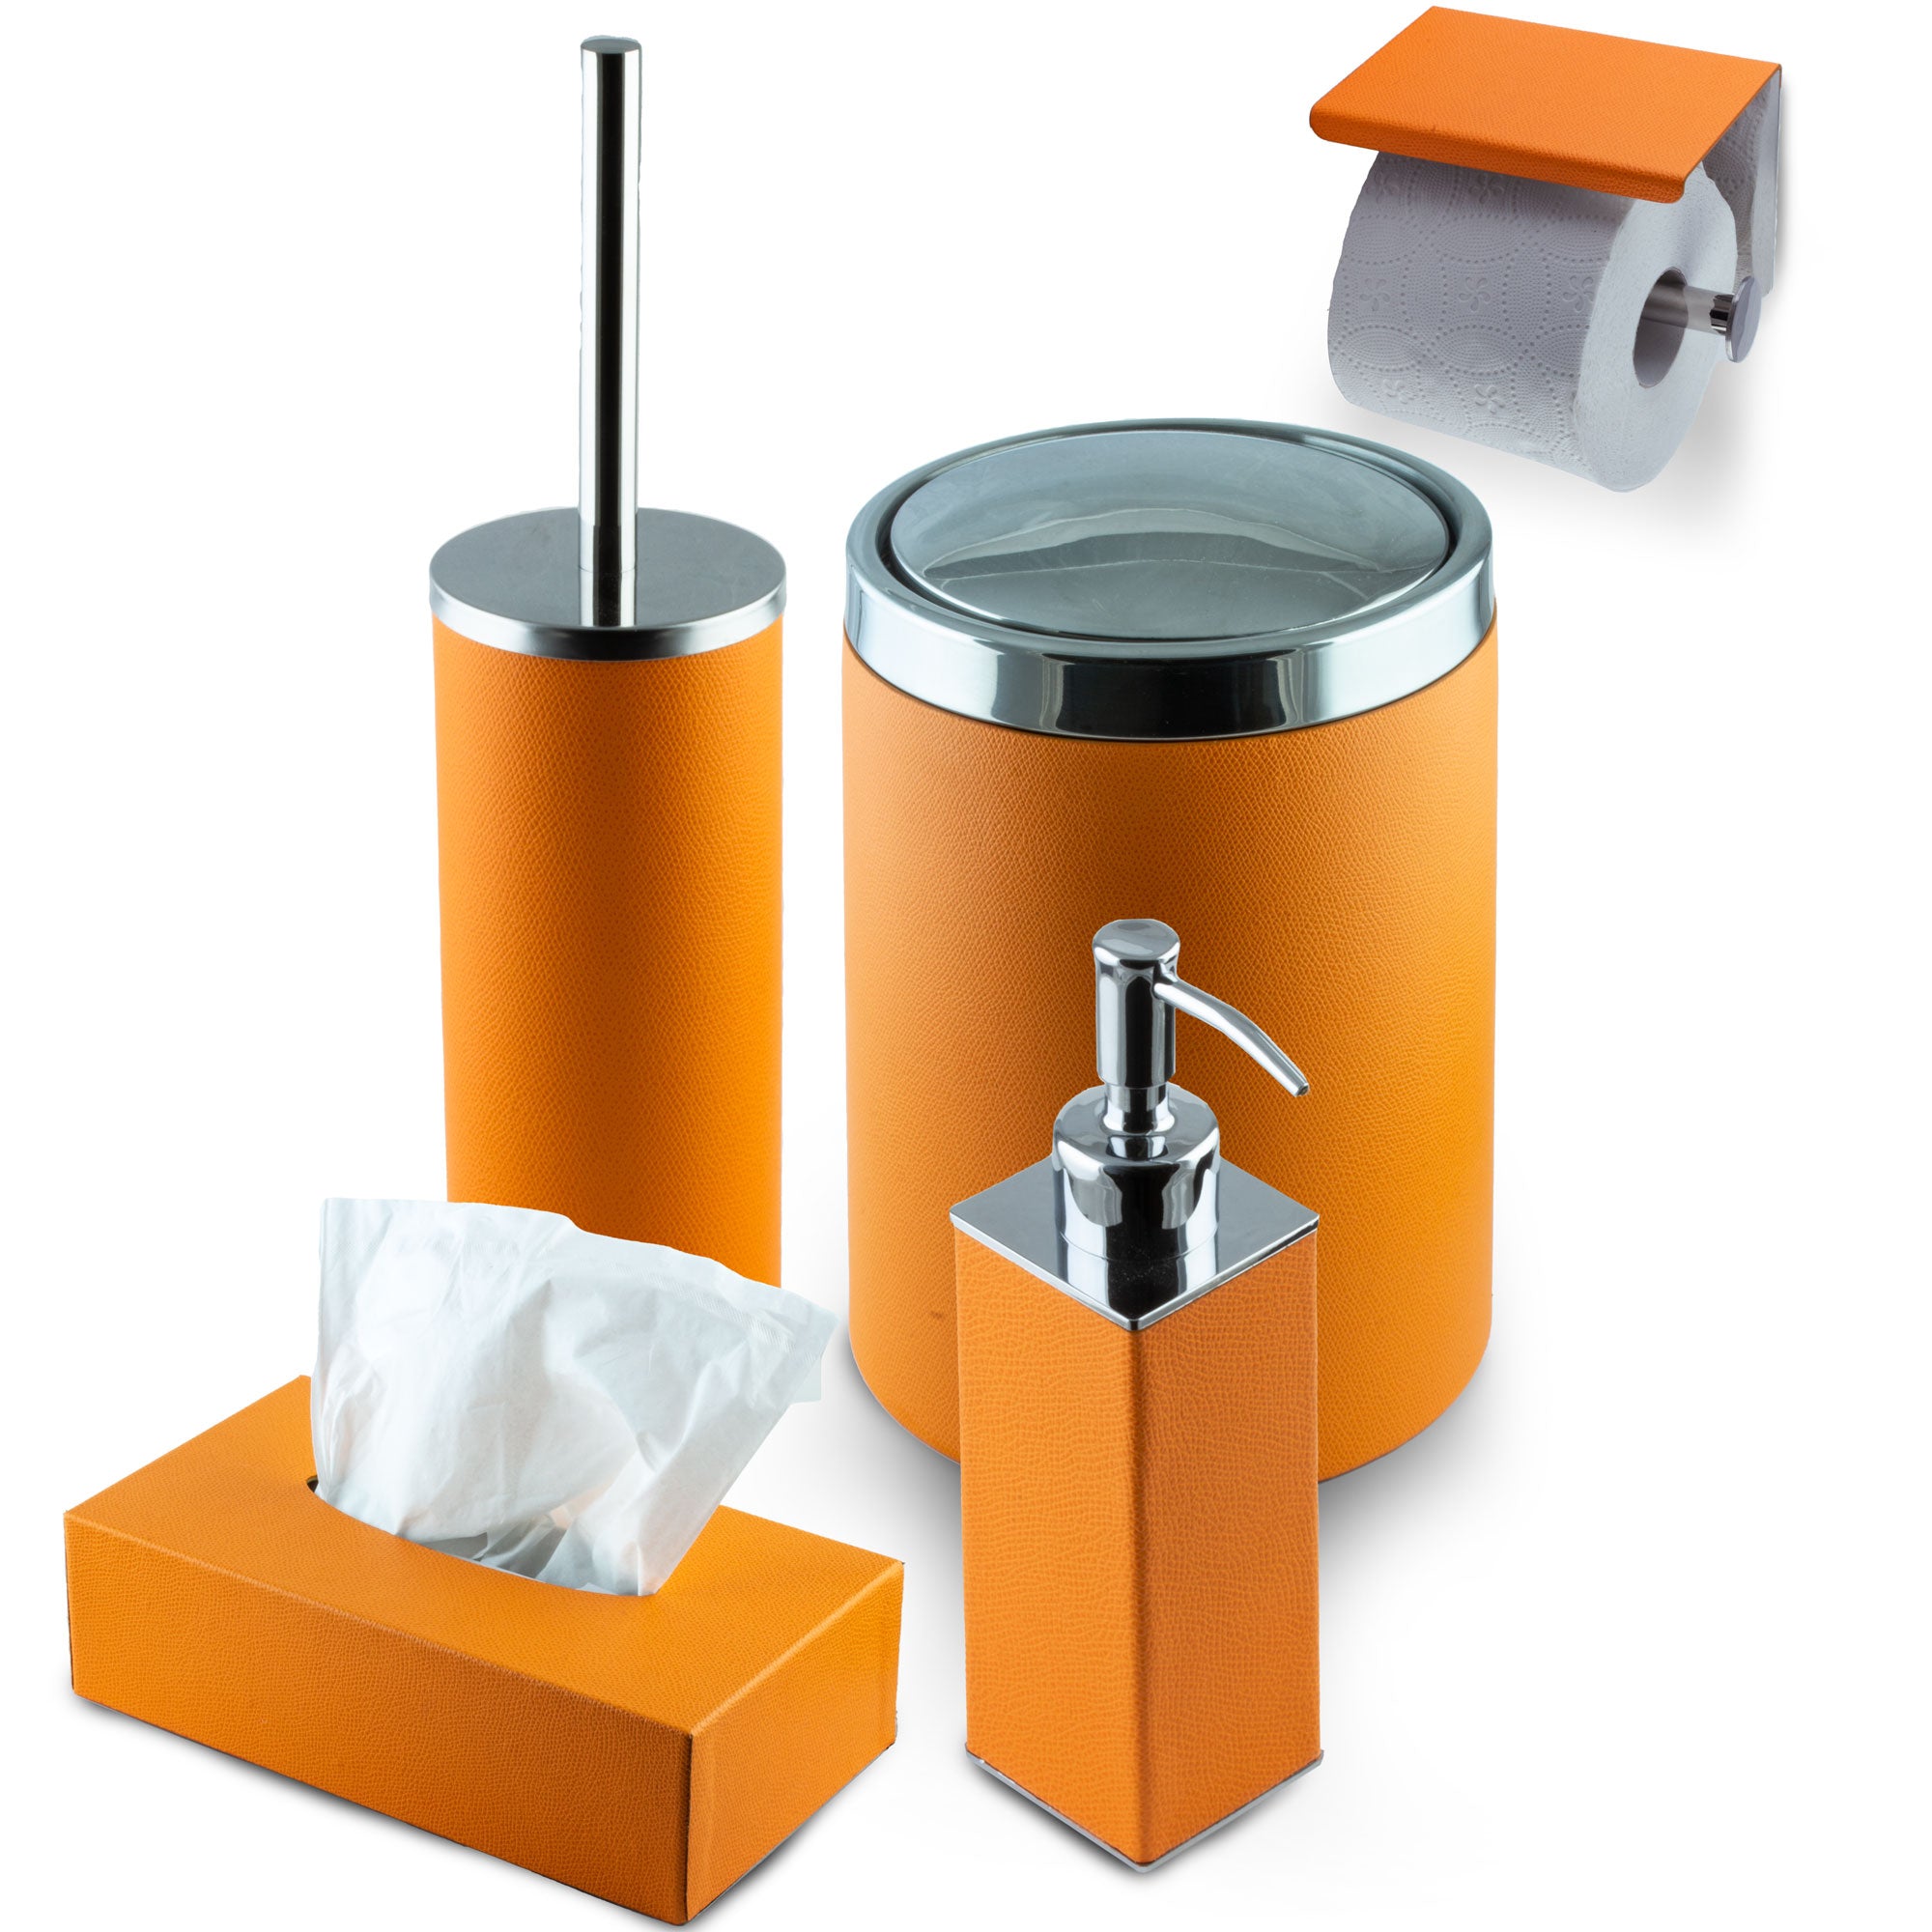 Leather toilet brush and holder set - Grained calf